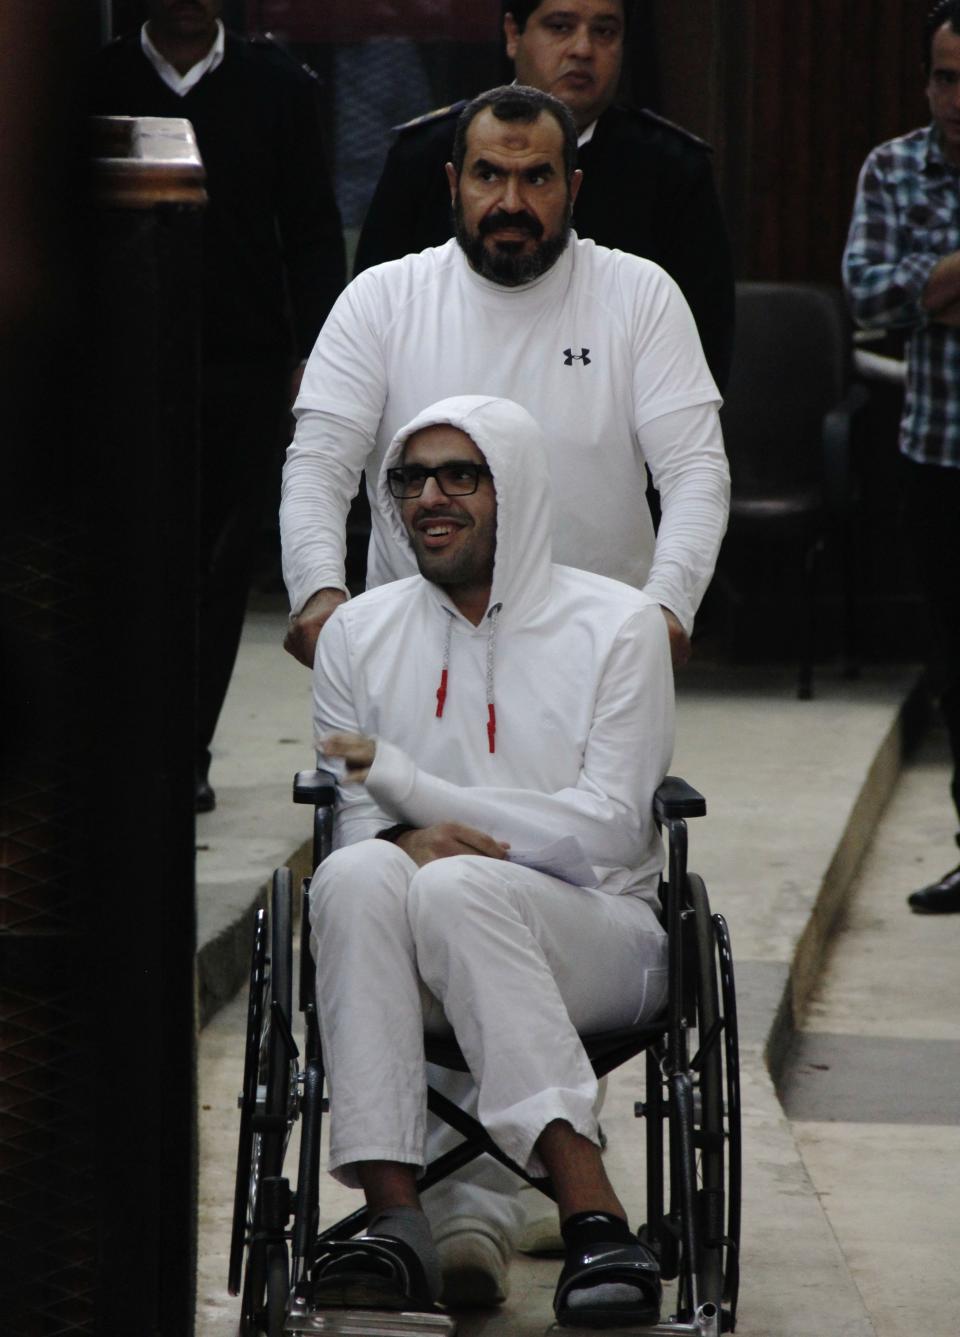 FILE - In this March 9, 2015 file photo, Mohamed Soltan, a dual U.S.-Egyptian citizen, is pushed by his father Salah during a court appearance in Cairo, Egypt. Human Rights Watch, an international rights group, said in a statement released Thursday, June 11, 2020, that Egyptian police raided the homes of two uncles of Soltan. On June 1, 32-year-old Soltan, now living in Virginia, filed a lawsuit against el-Beblawi accusing him of targeting him for attempted extrajudicial execution and torture while he was in detention in Cairo between 2013 and 2015. Under pressure from the Obama administration, Egypt released Soltan in 2015, although his father remains in prison. El-Beblawi currently lives in Washington, where he works as an executive director of the International Monetary Fund. (AP Photo/Heba Elkholy, File)